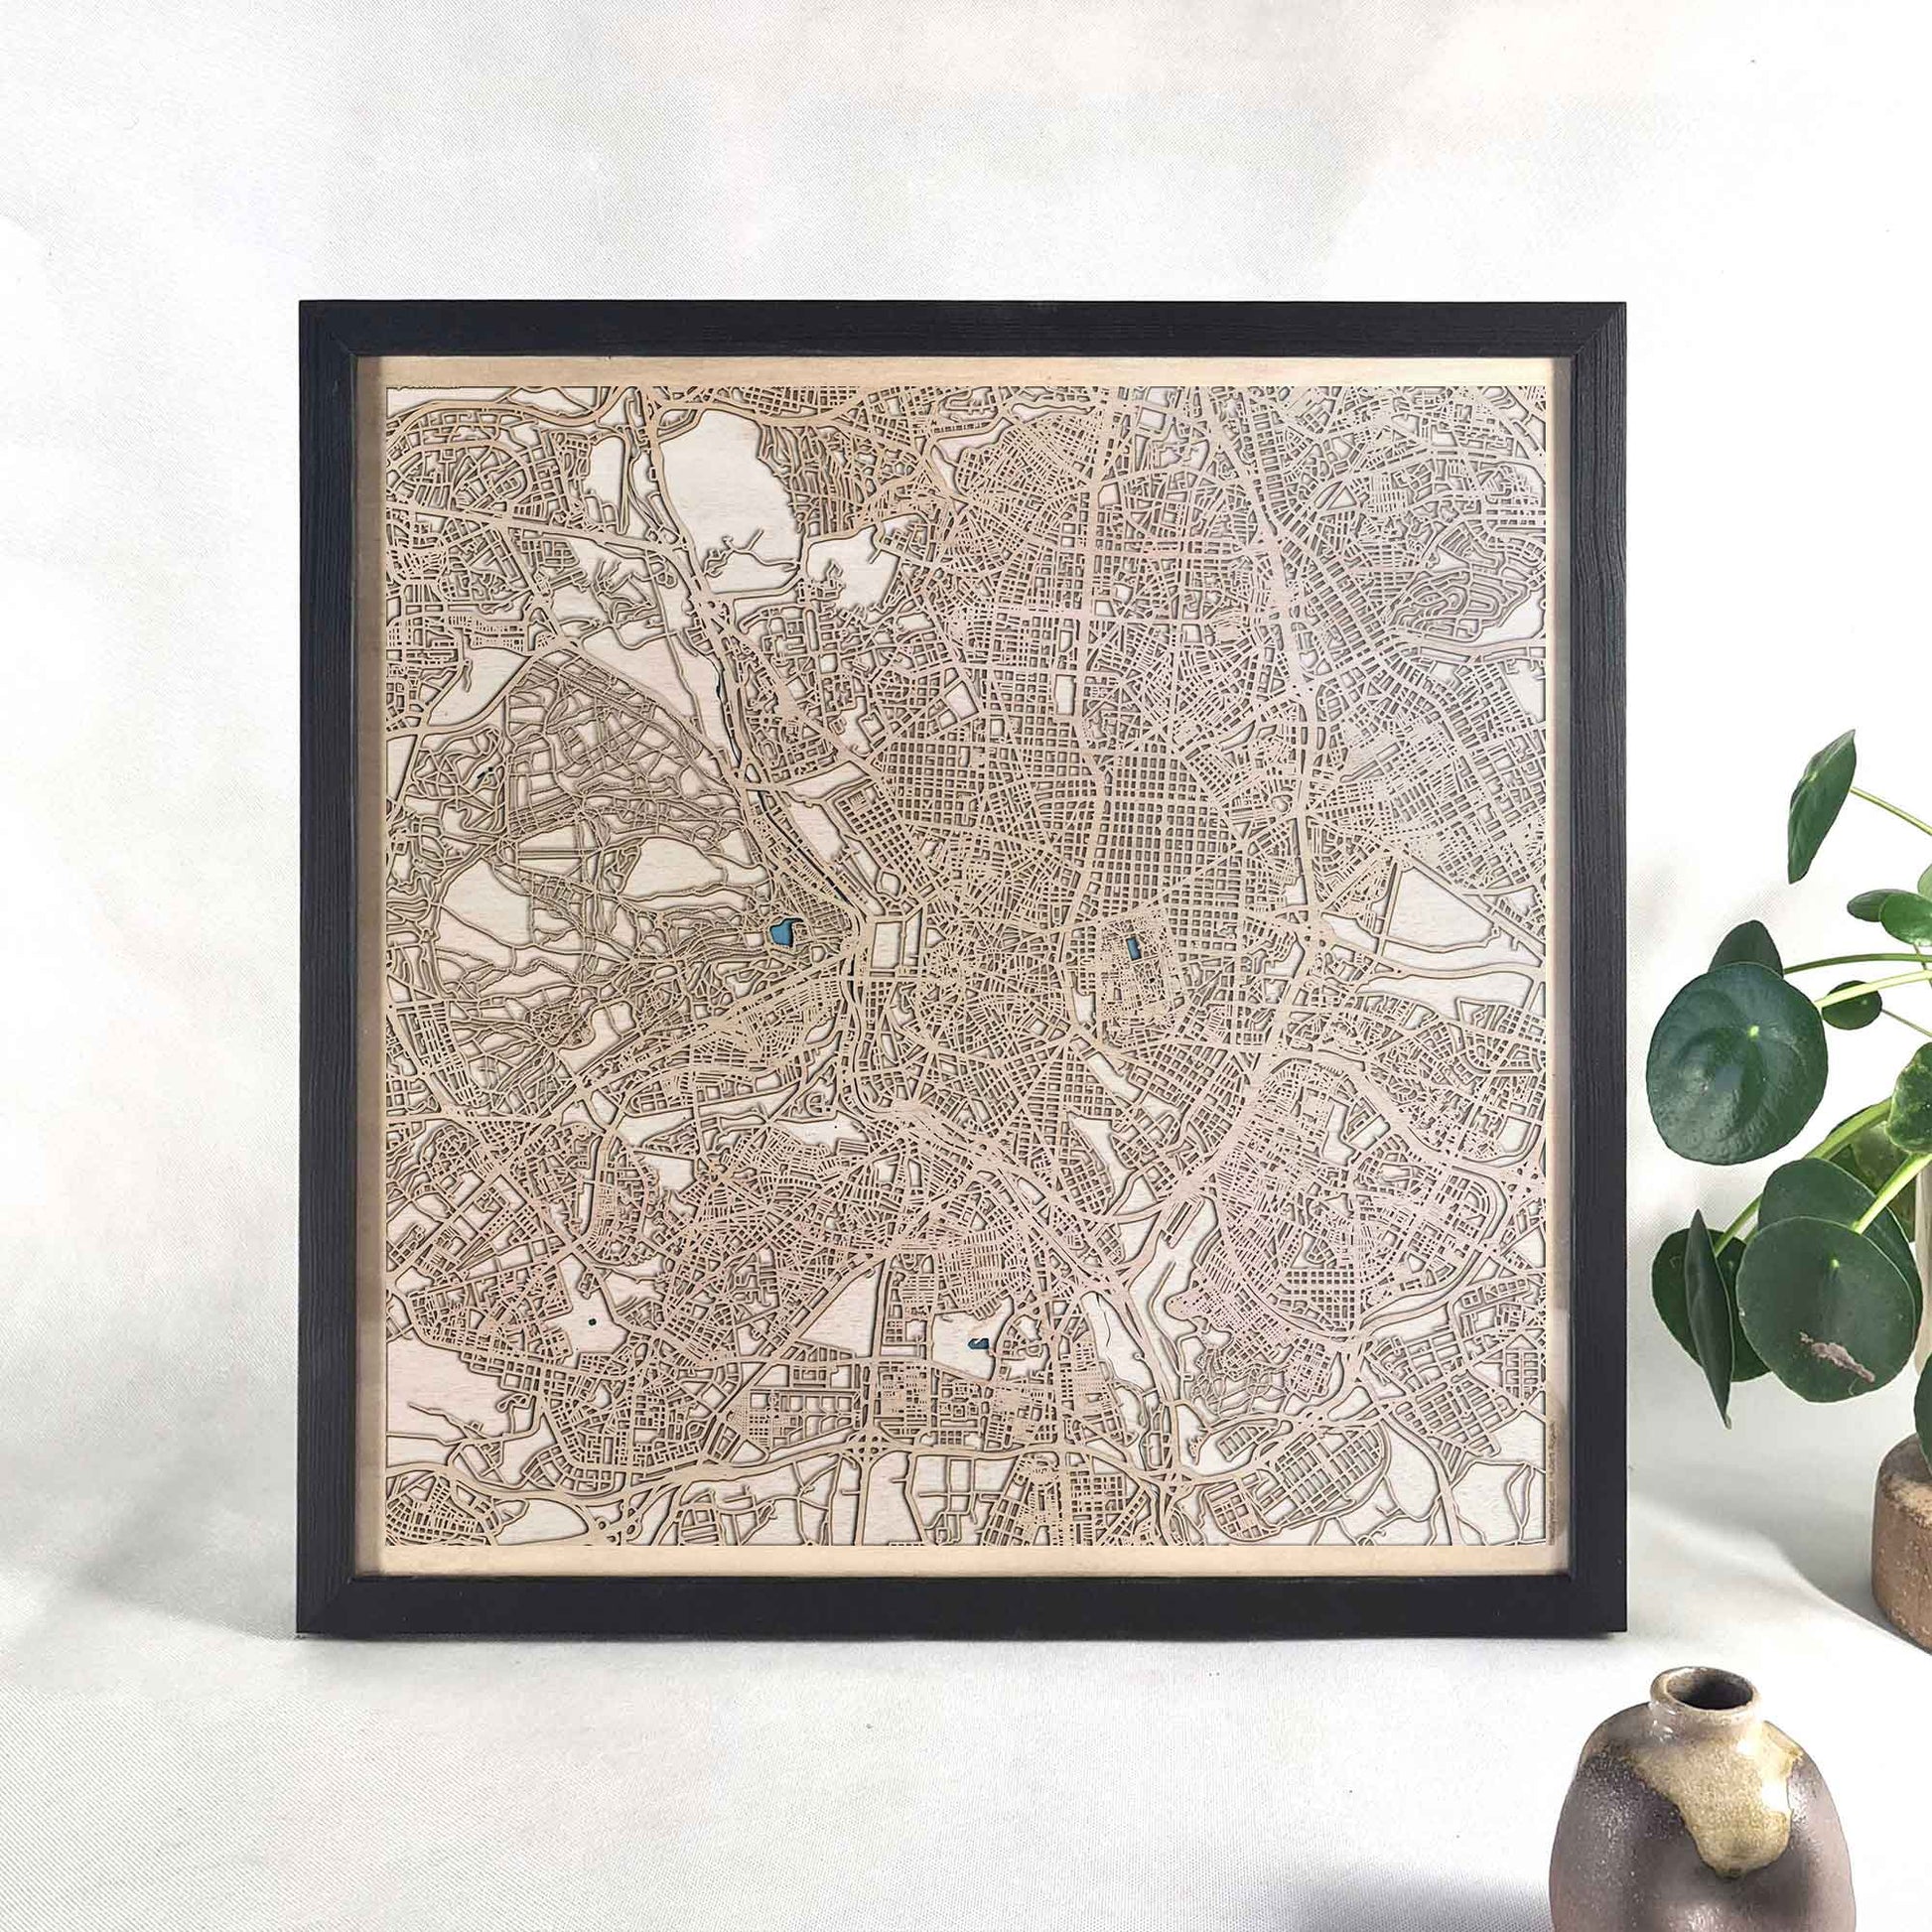 Madrid Wooden Map by CityWood - Custom Wood Map Art - Unique Laser Cut Engraved - Anniversary Gift